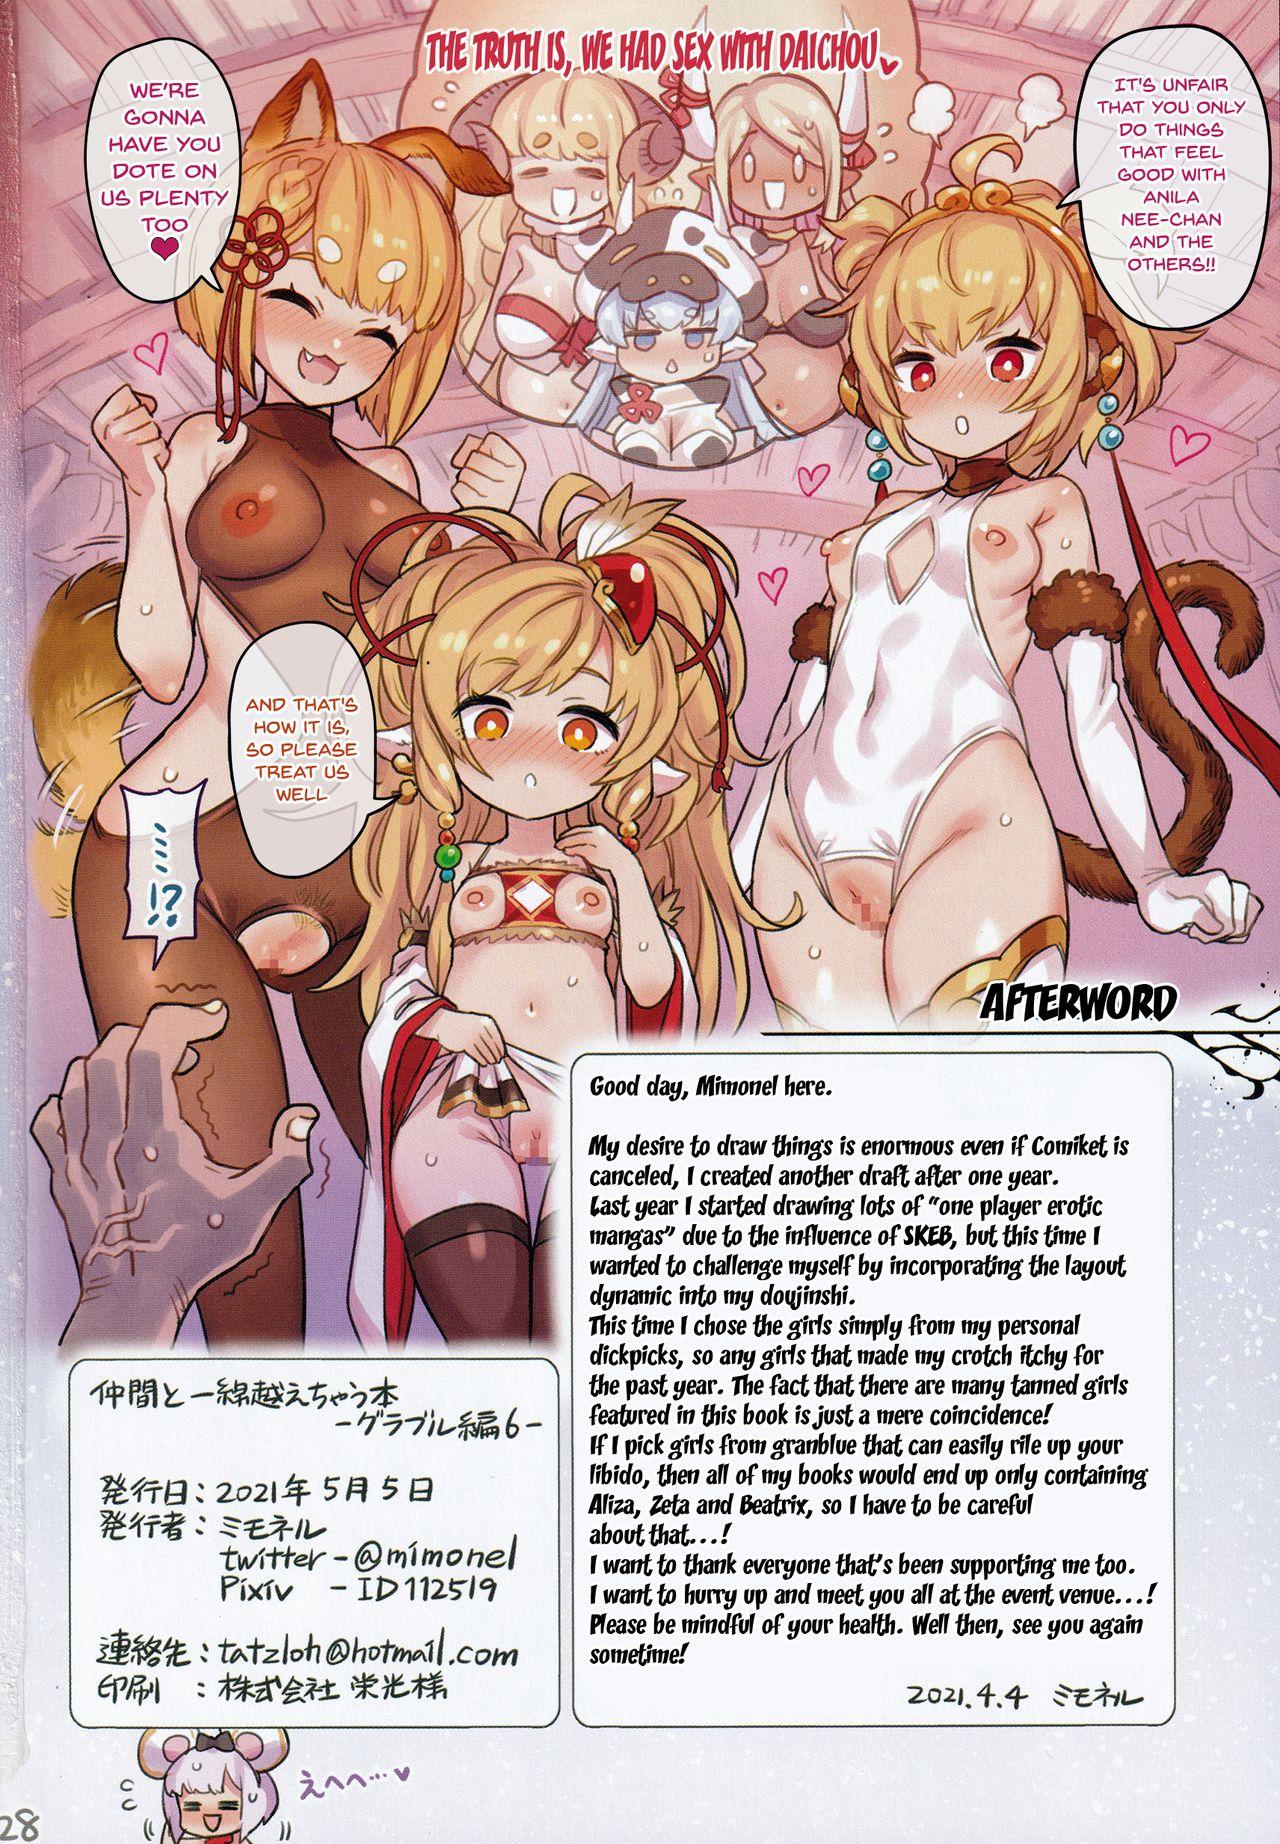 Tall (AC3) [Mimoneland (Mimonel)] Nakama to Issen Koechau Hon -Grablu Hen 6- | A Book About Crossing The Line With Your Friends ~GranBlue Book 6~ (Granblue Fantasy) [English] {Doujins.com} - Granblue fantasy Cuminmouth - Page 26